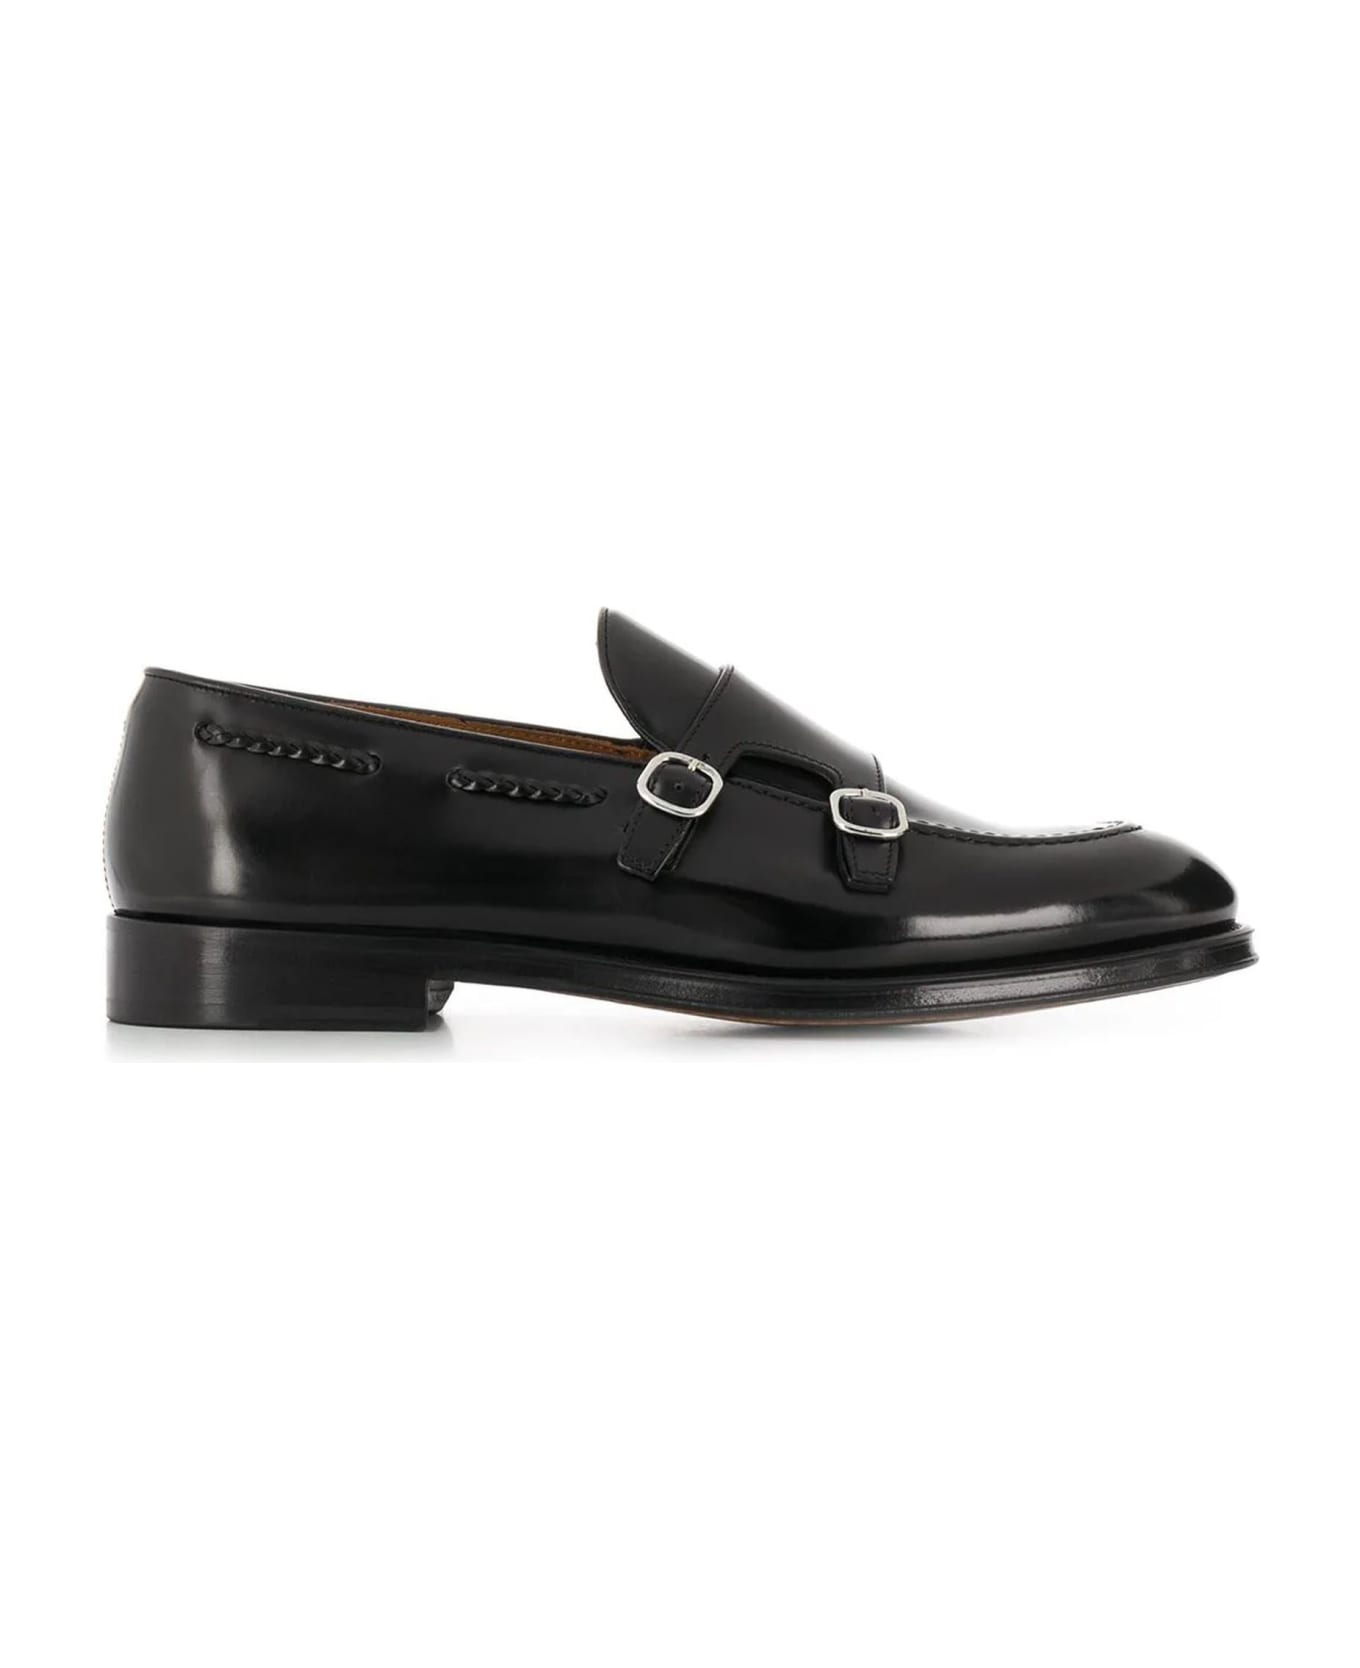 Doucal's Black Leather Polished Monk Shoes - Black ローファー＆デッキシューズ